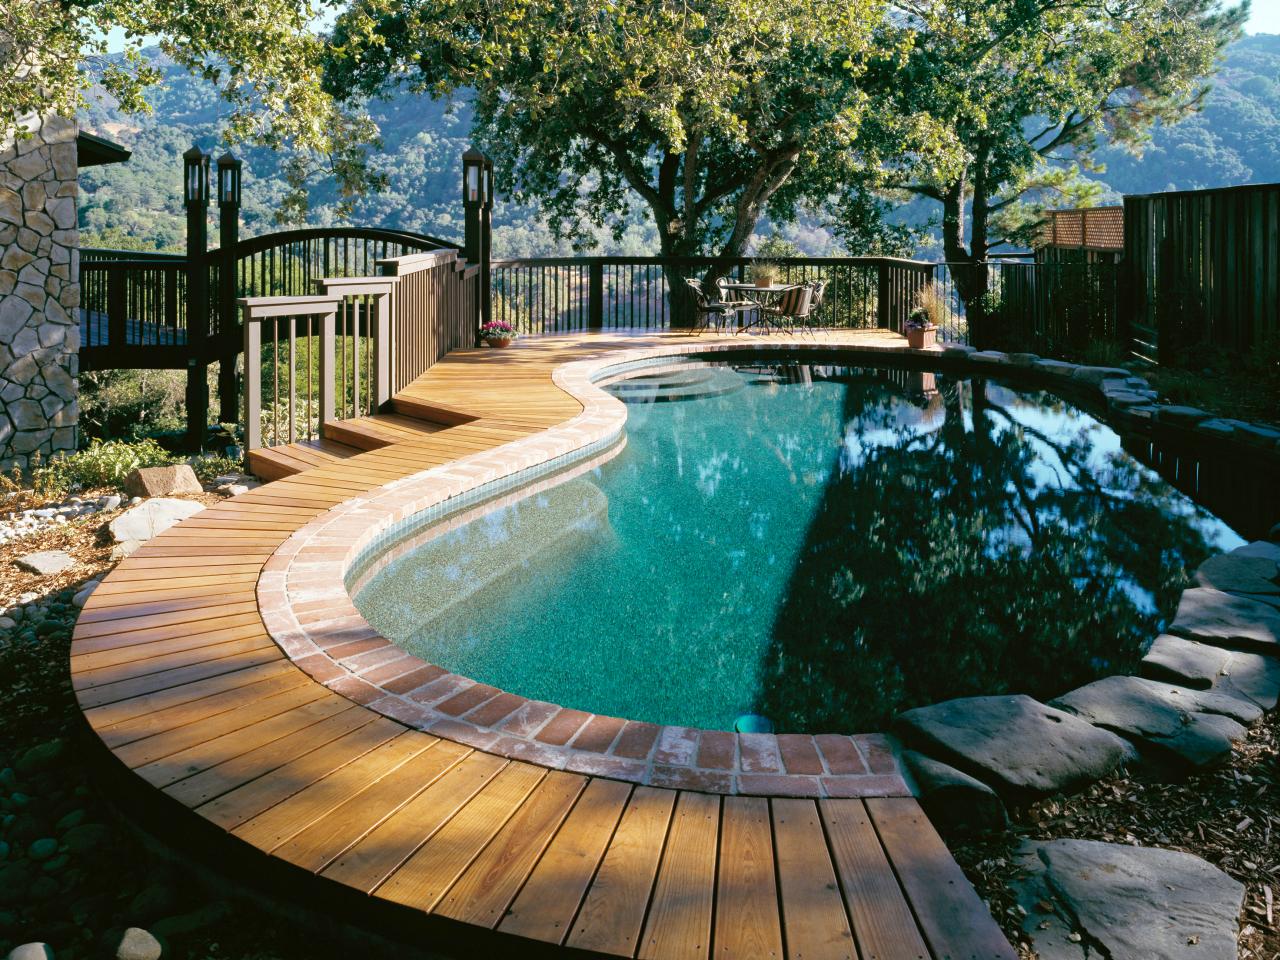 Pool Deck Designs And Options Diy, How To Build A Small Deck Around Above Ground Pool